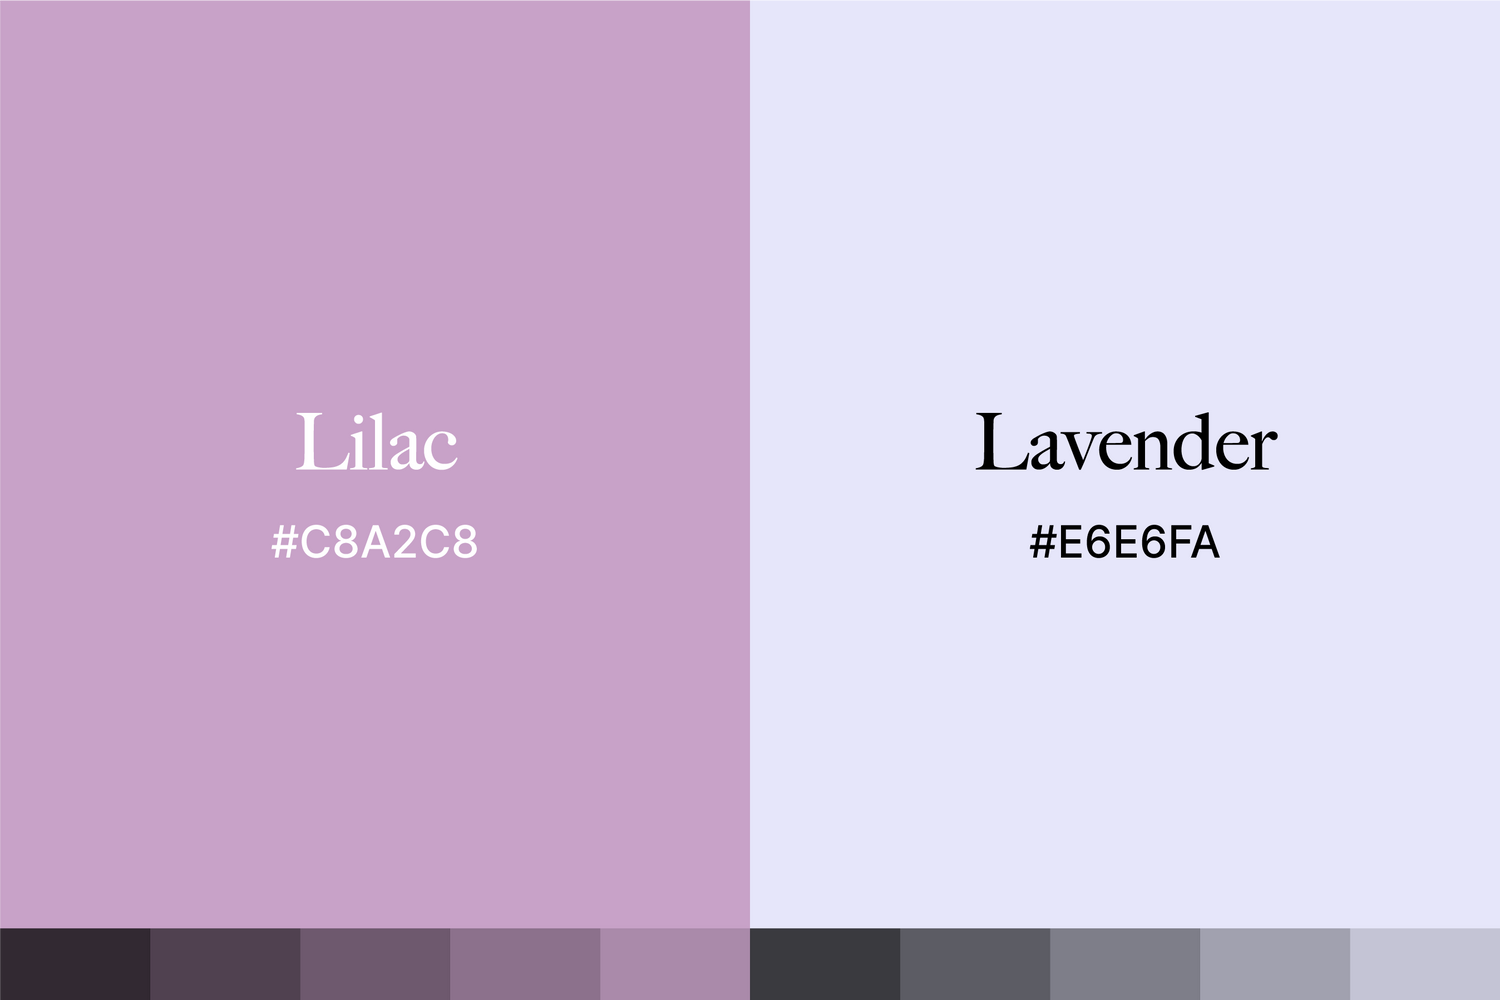 9. "Lavender" or "Lilac" shades - wide 5